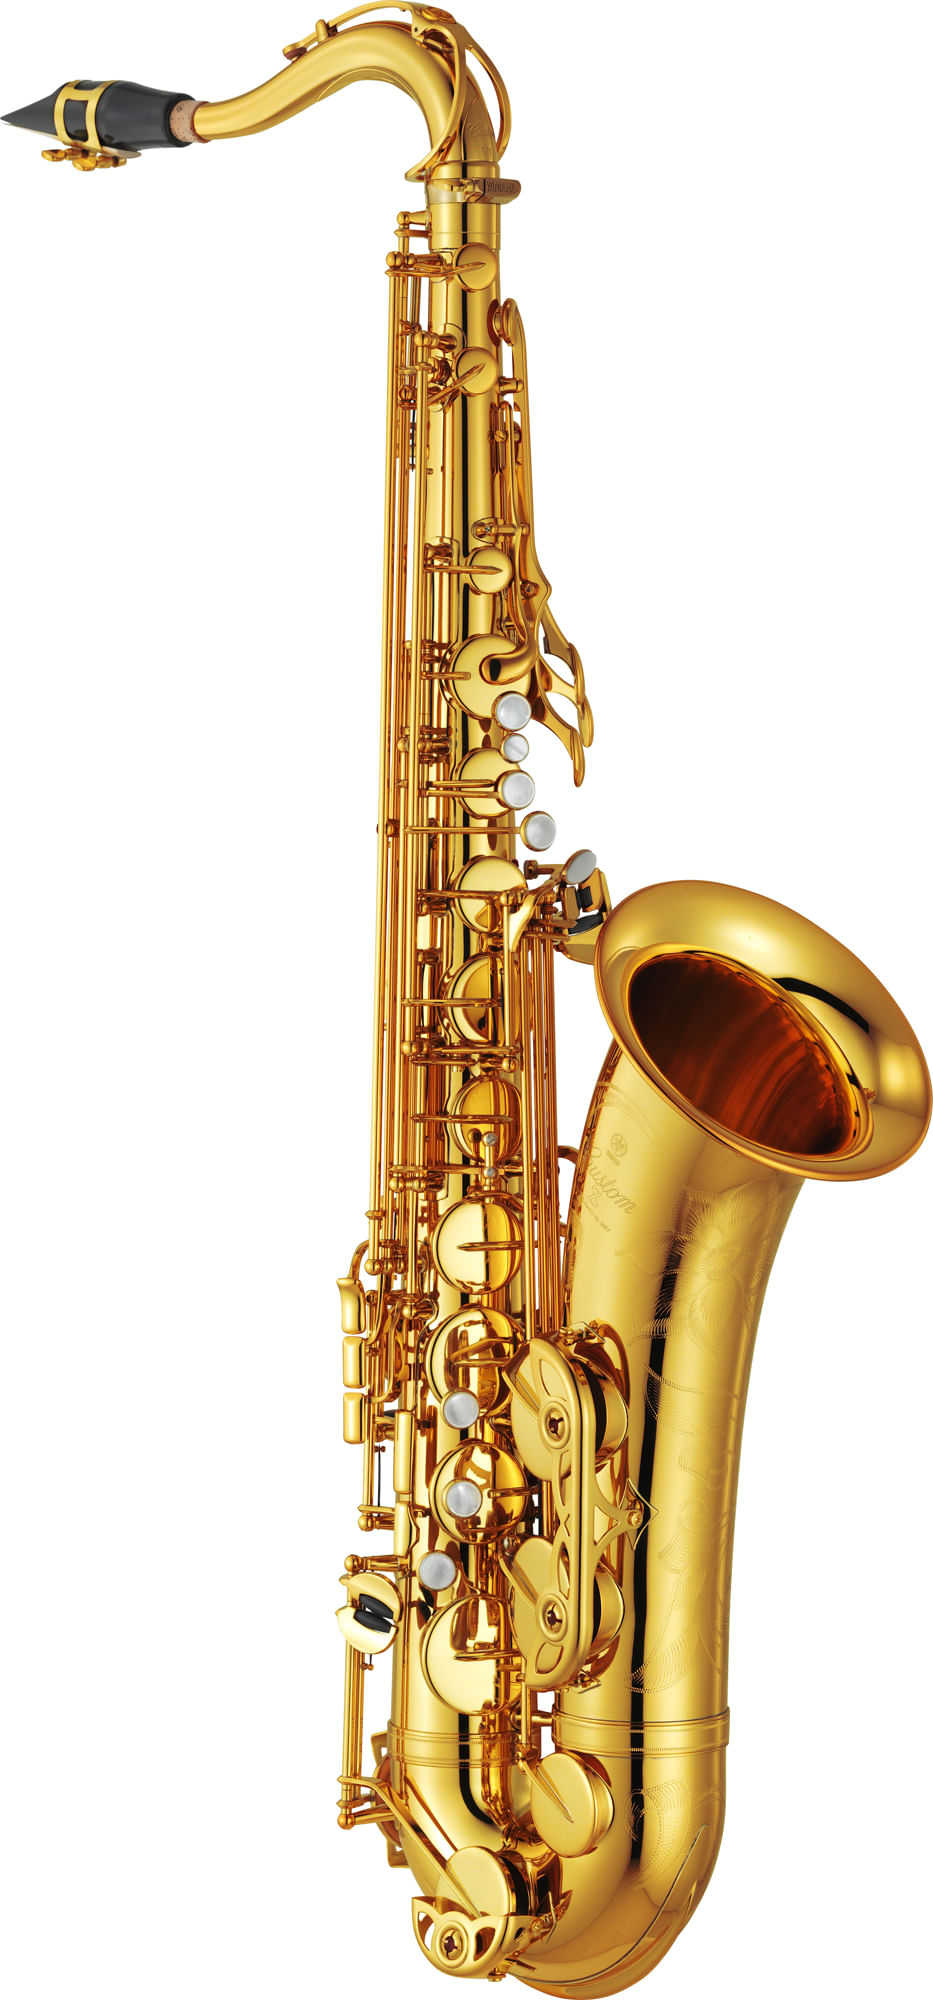 View larger image of Yamaha YTS-82ZII Tenor Saxophone - Gold Lacquer